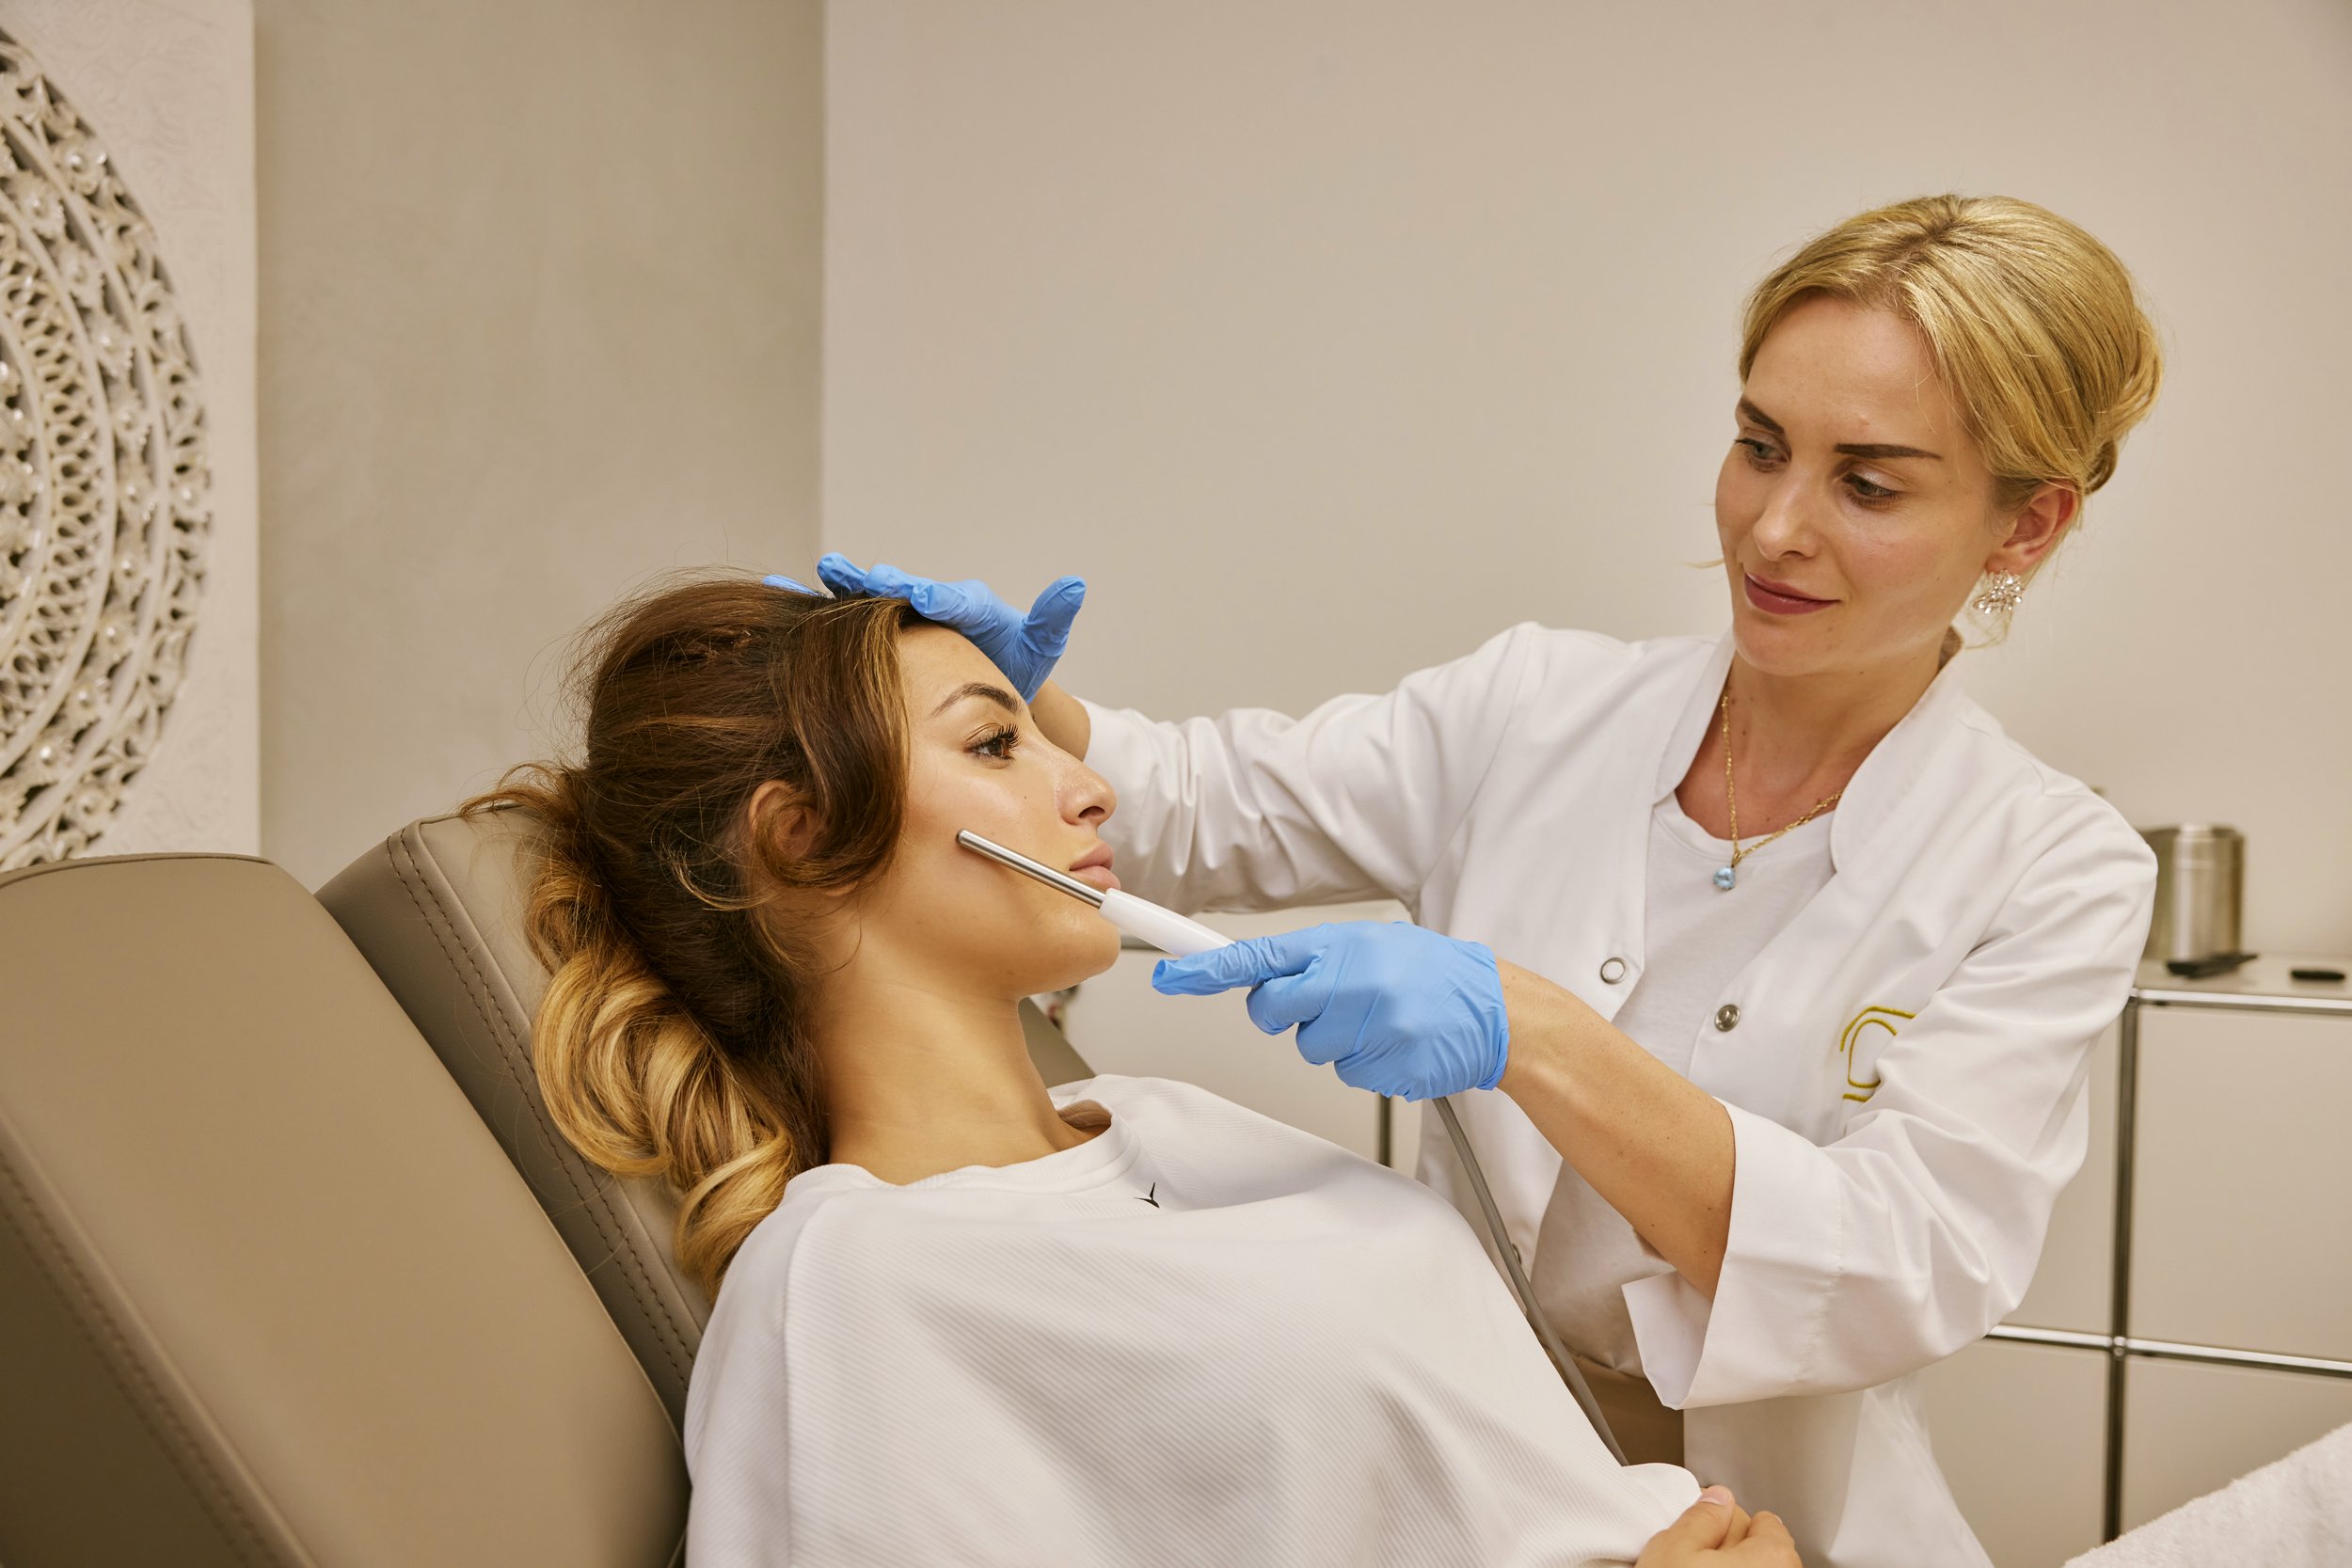 Treatments after facial surgery and scar treatments